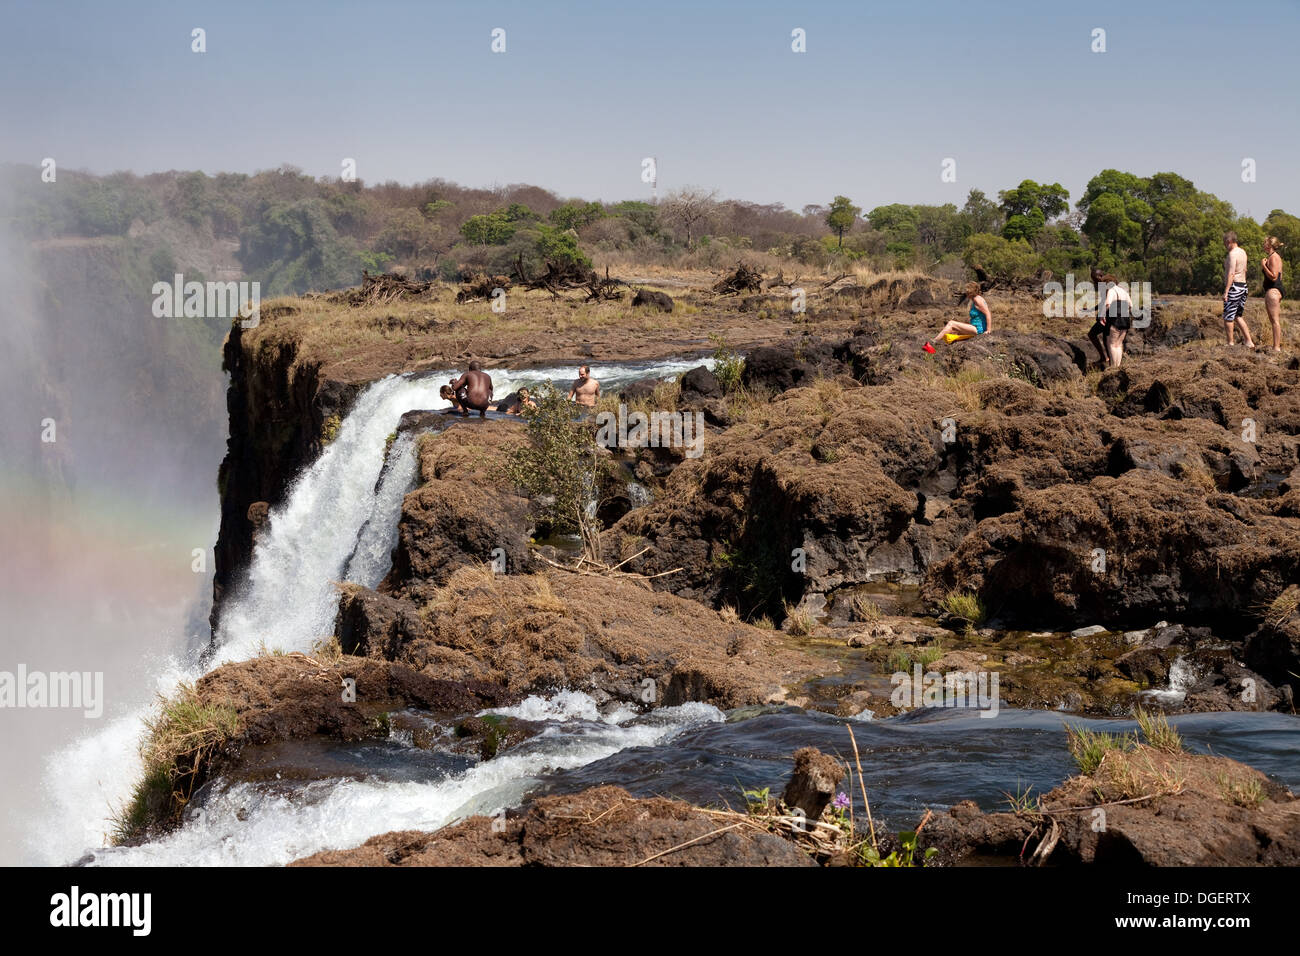 Tourists swimming in Devils Pool at the edge of the Victoria Falls, taken from Livingstone Island, Victoria Falls, Zambia Africa Stock Photo